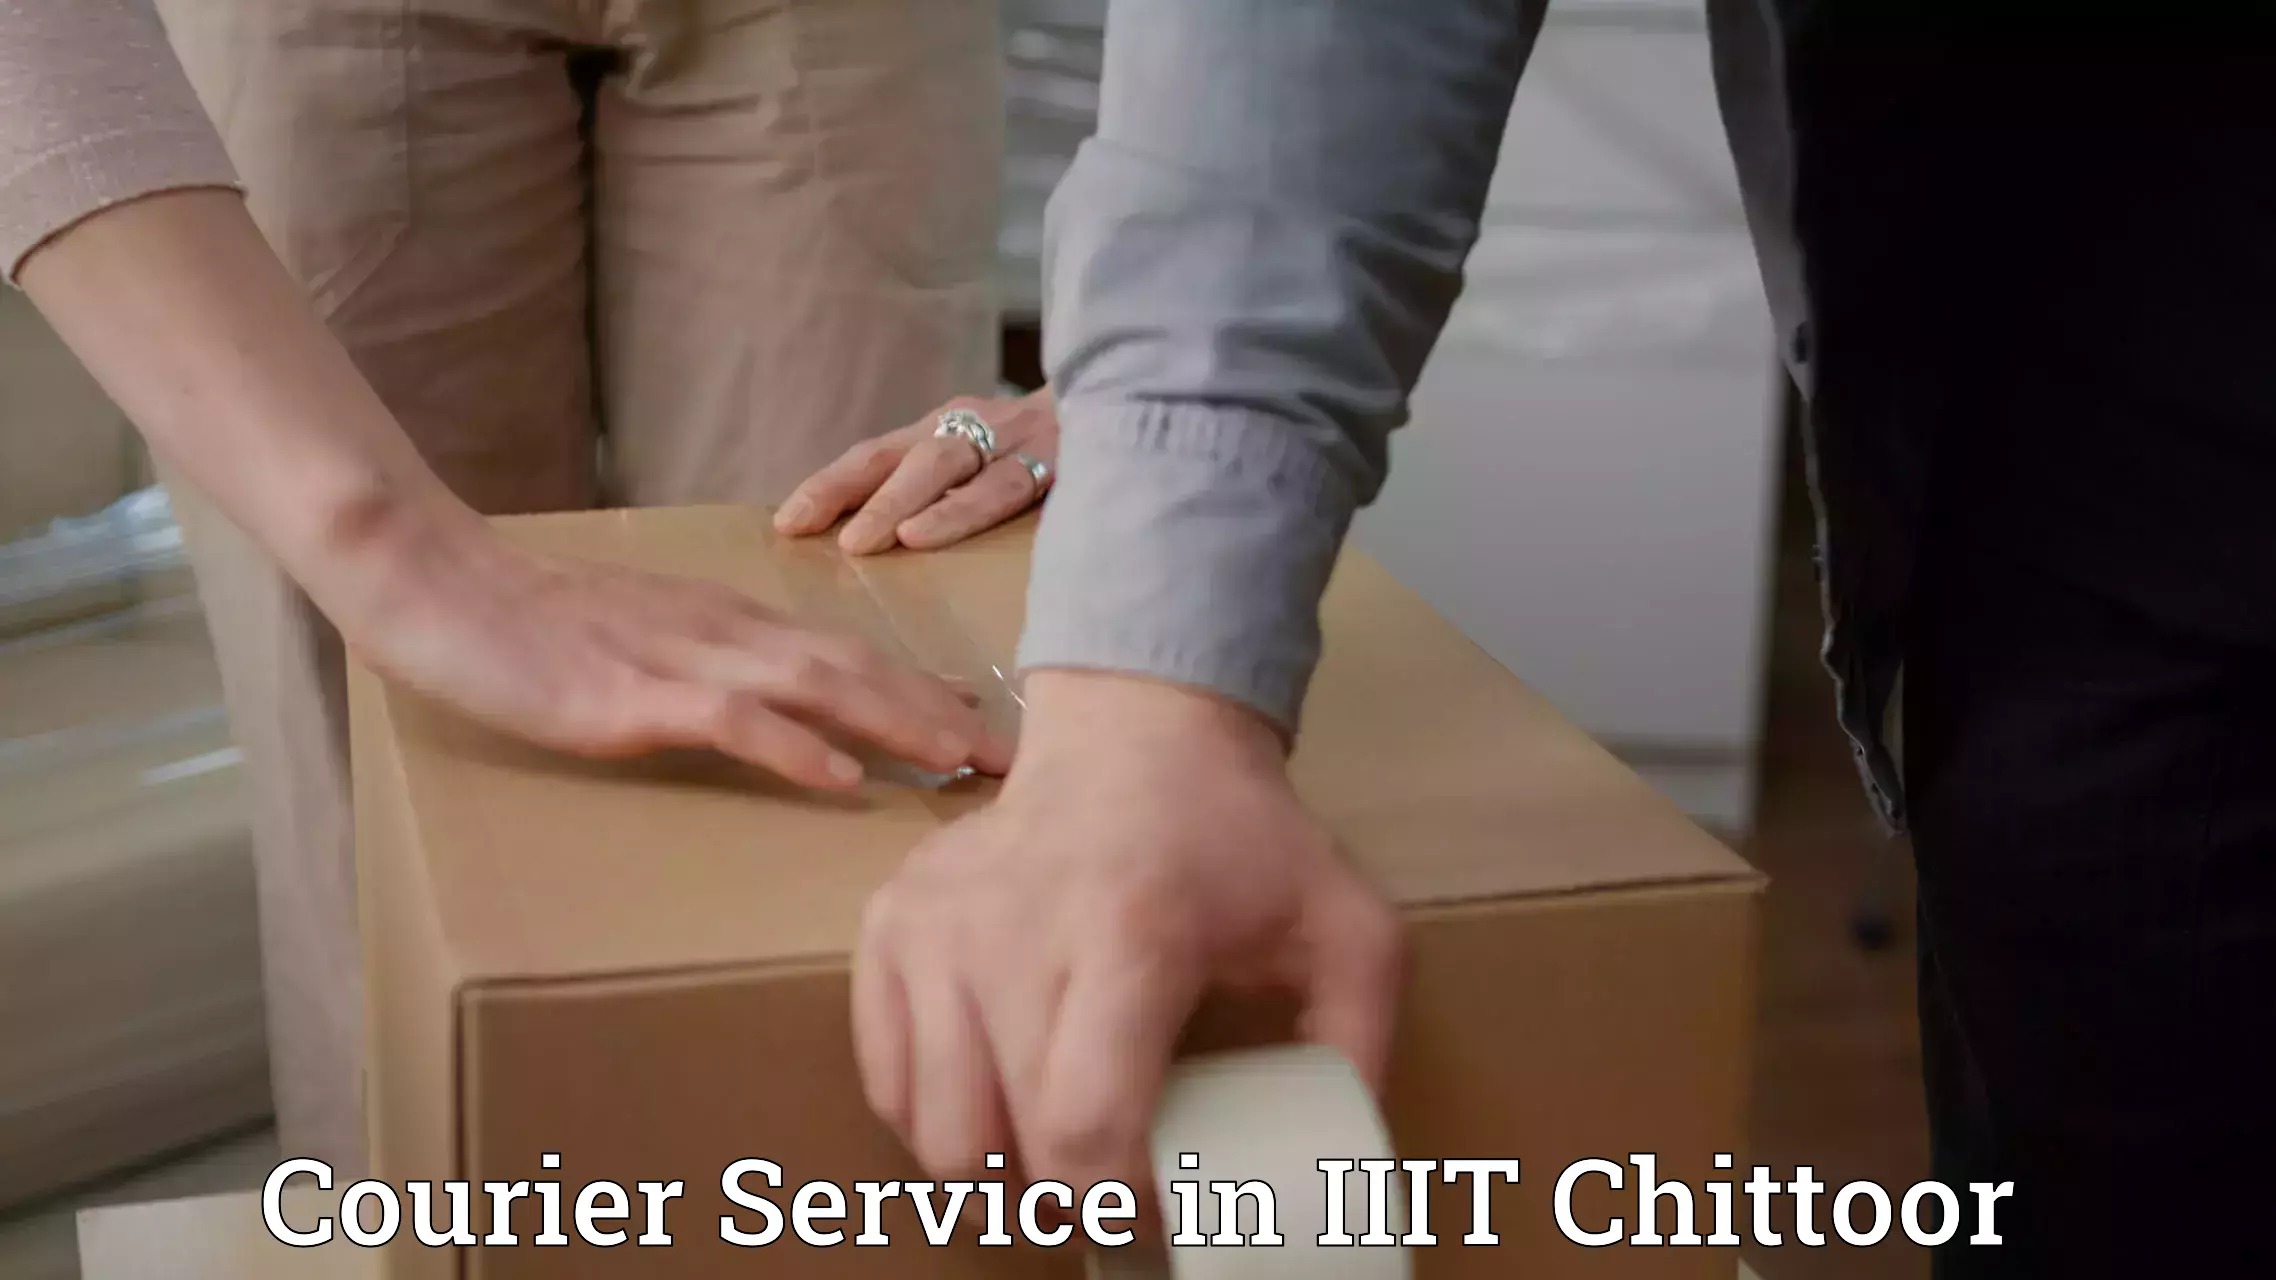 E-commerce shipping partnerships in IIIT Chittoor